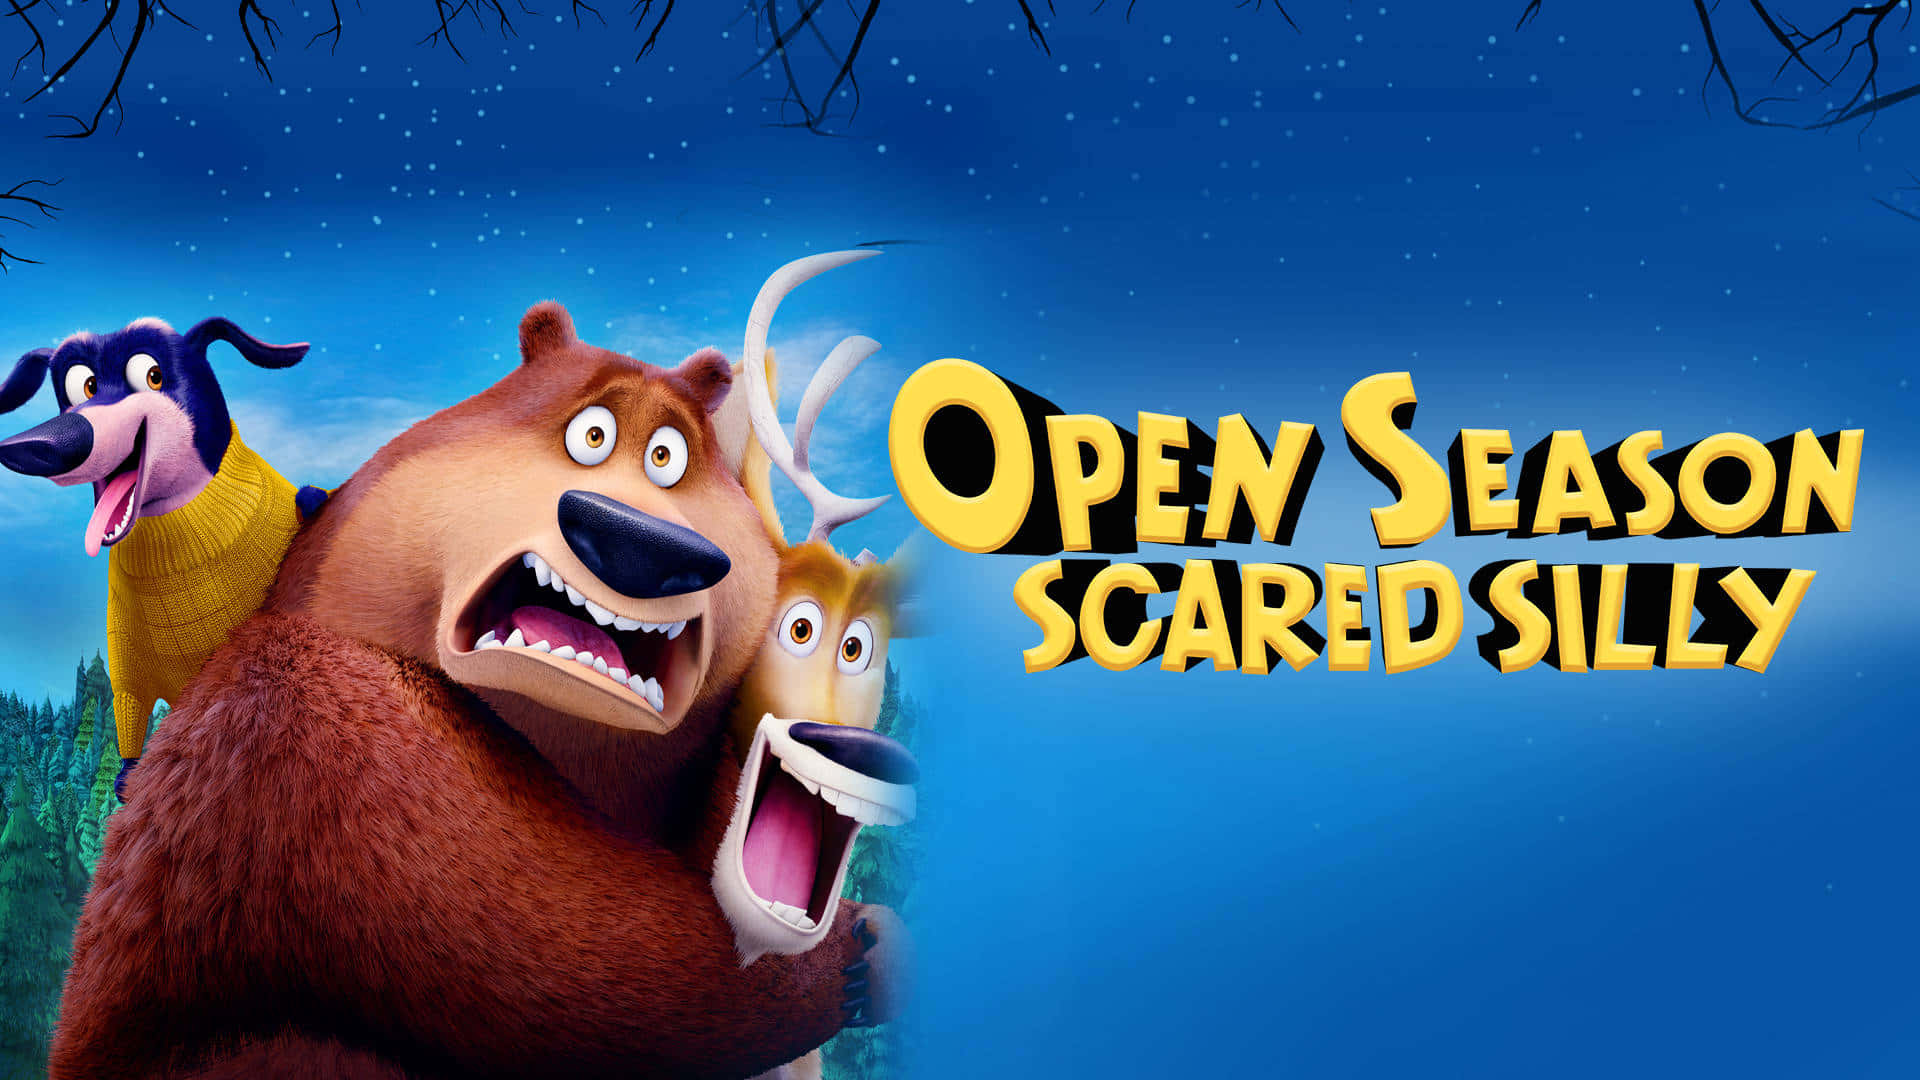 Ridiculous Open Season Scared Silly Poster Wallpaper